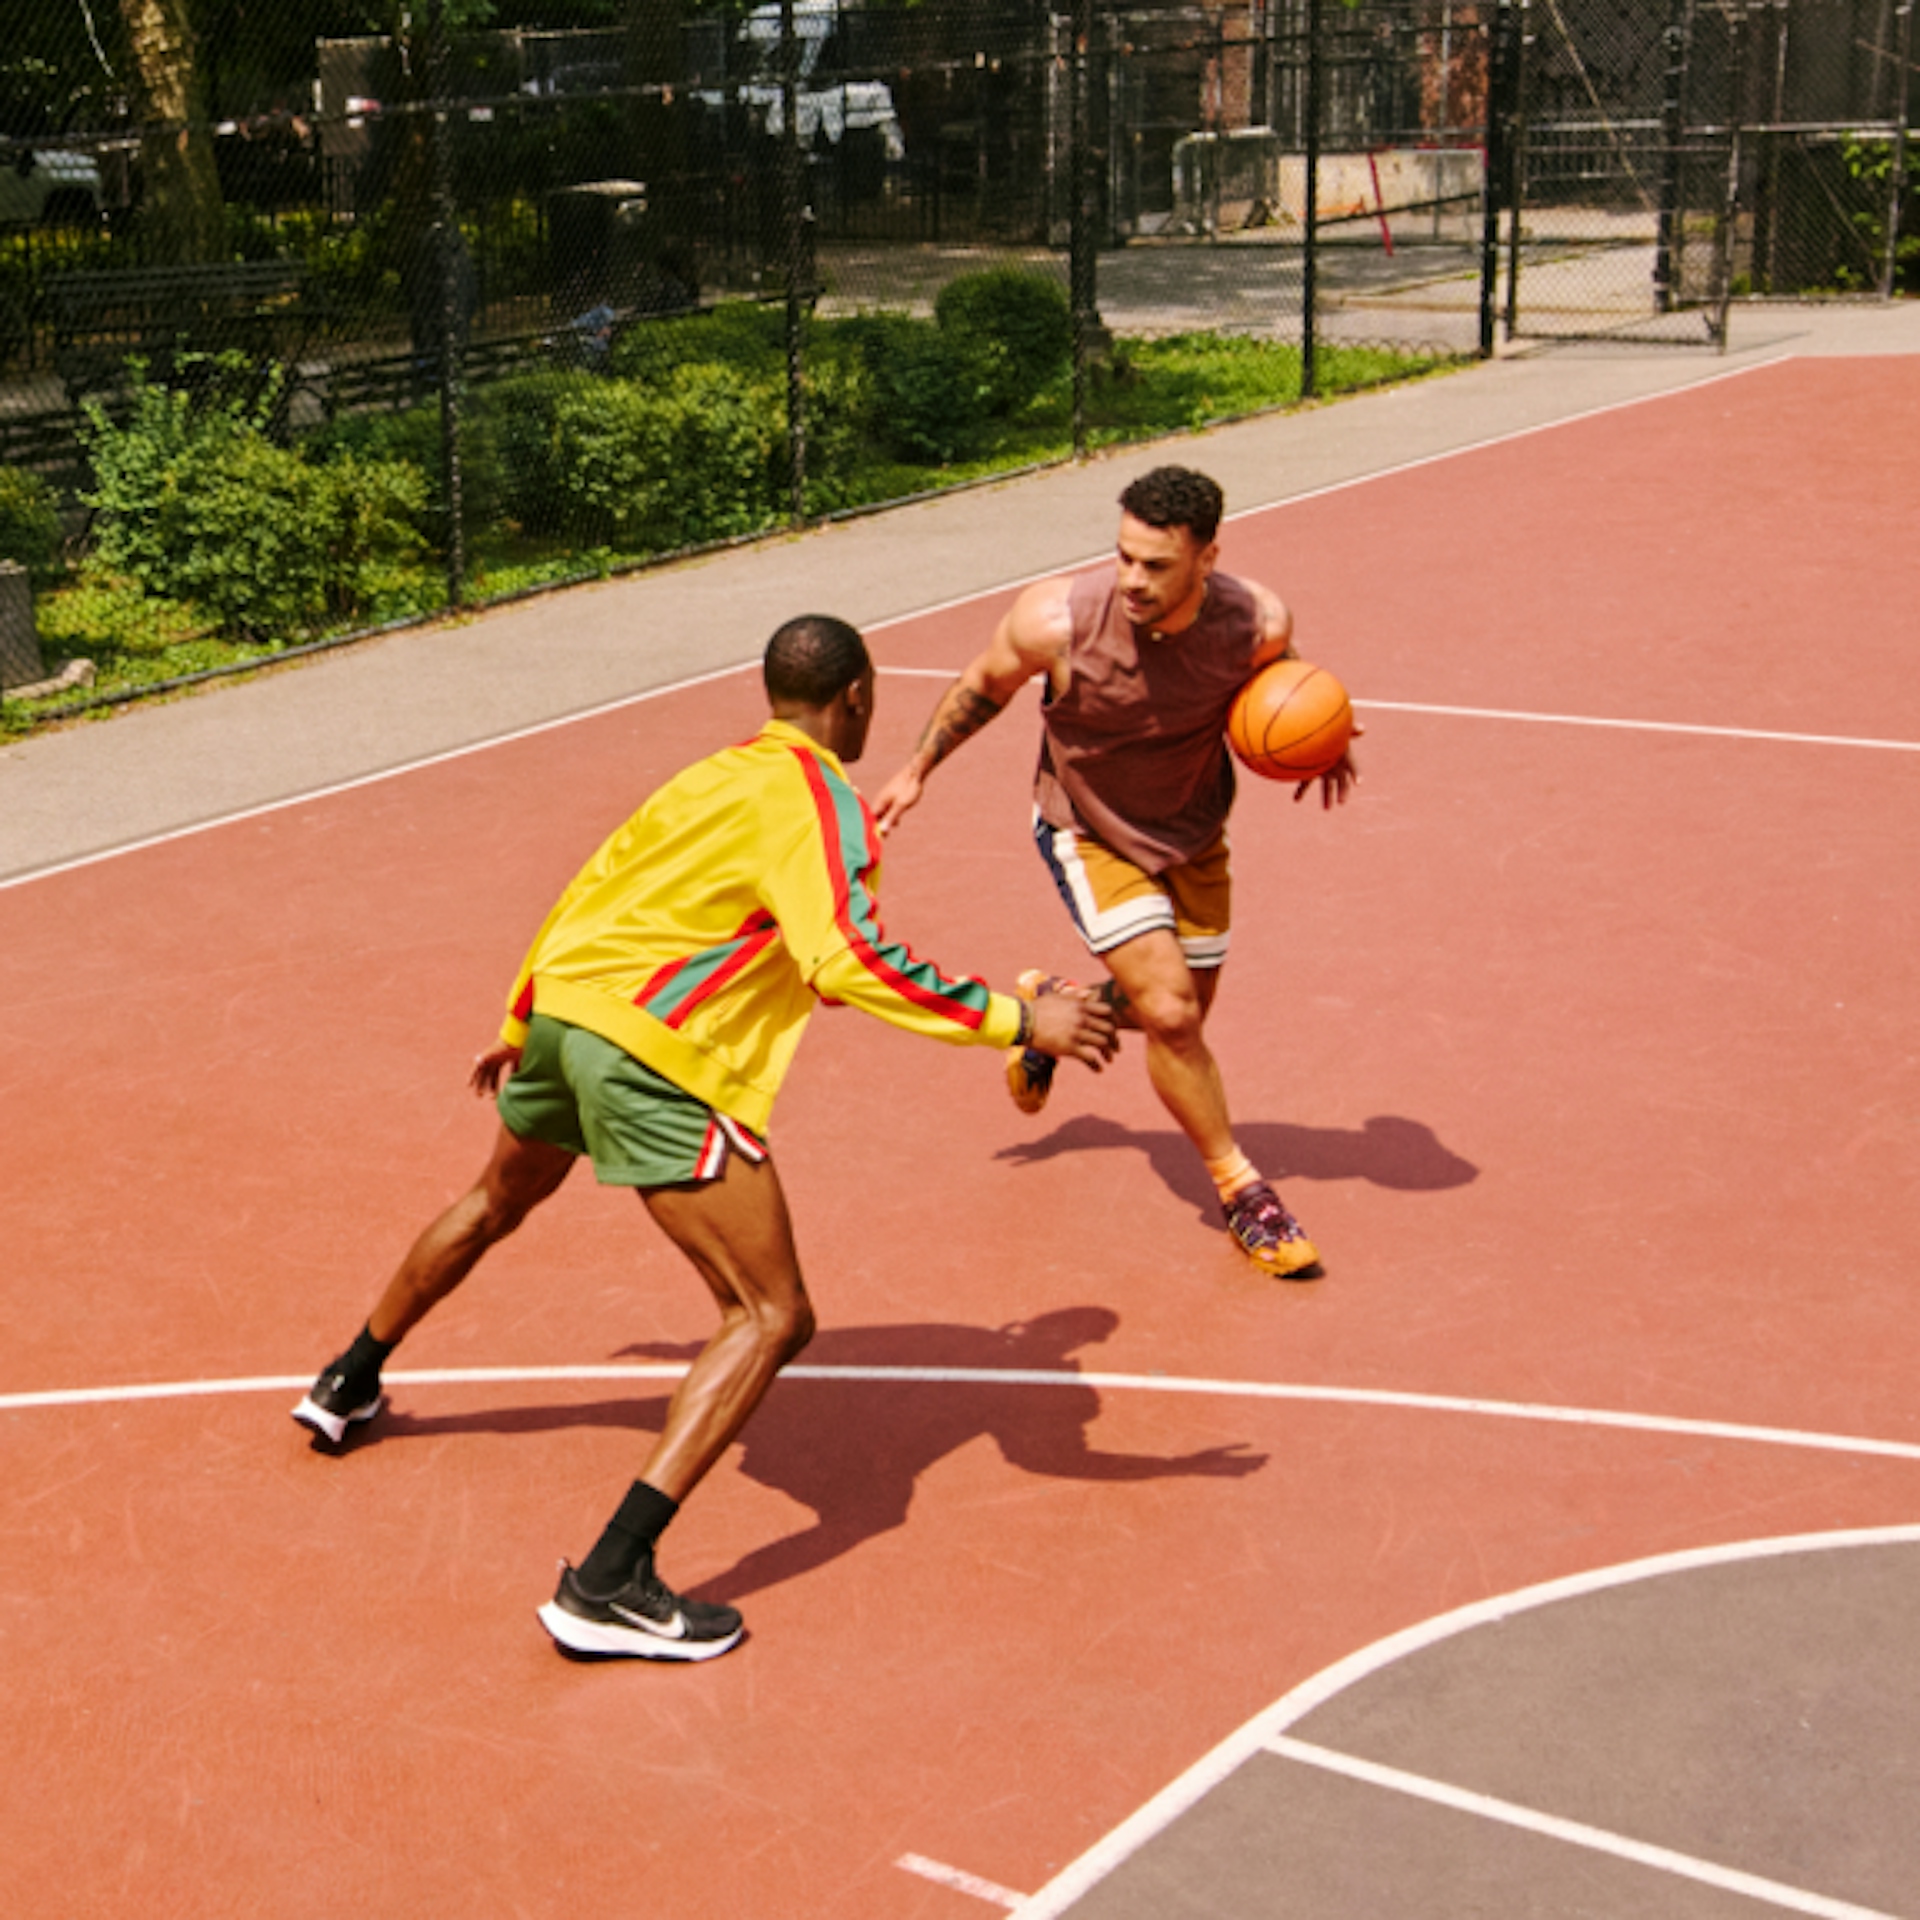 Two people are playing basketball on an outdoor court. One, wearing a yellow jacket and green shorts, is defending against the other, who is dribbling the ball while wearing a brown sleeveless shirt and multicolored shorts. The court is surrounded by a fence and greenery.